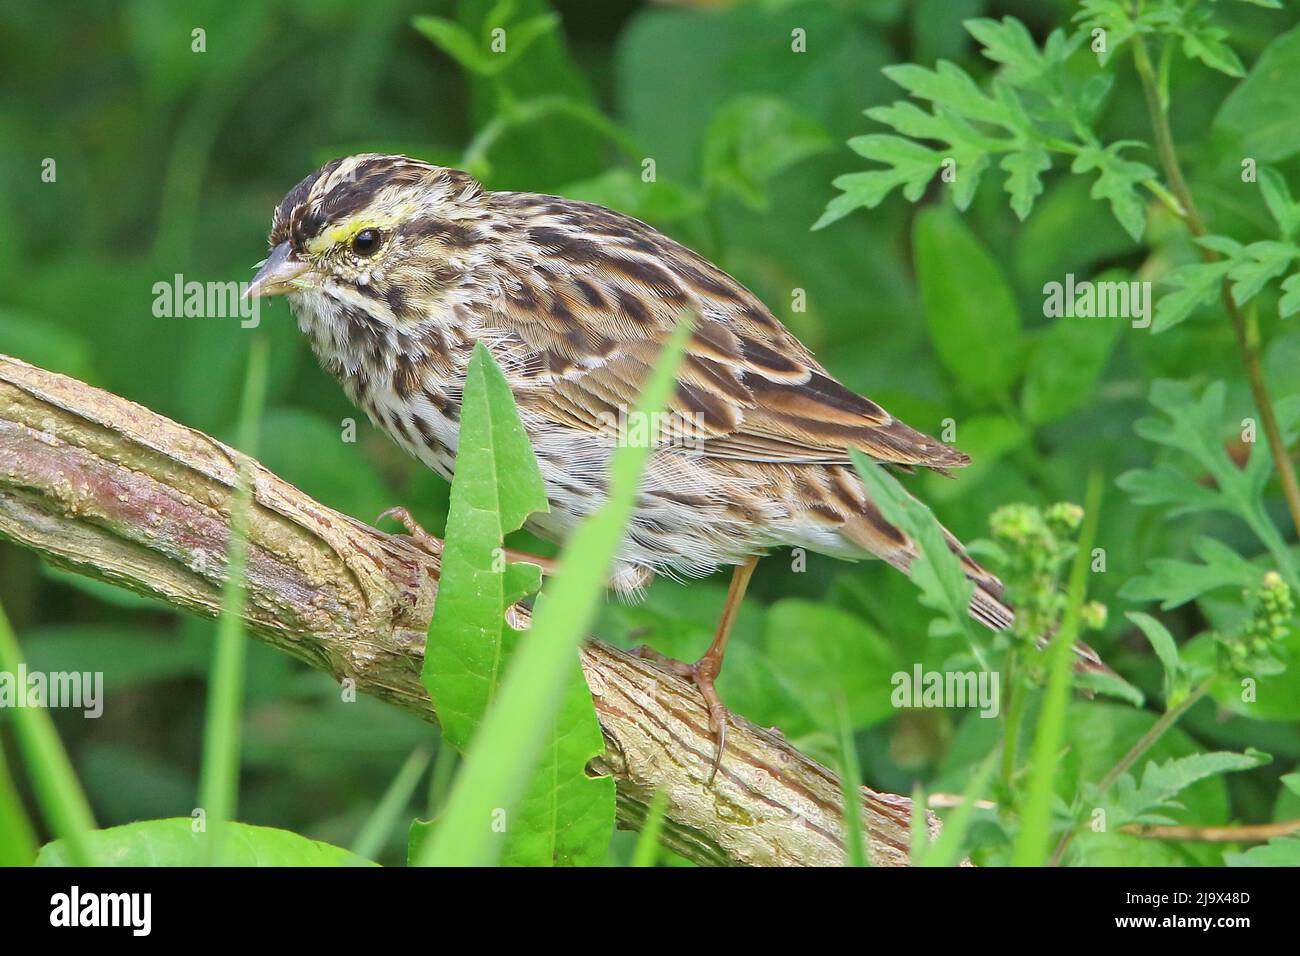 Savannah sparrow perched on a branch Stock Photo